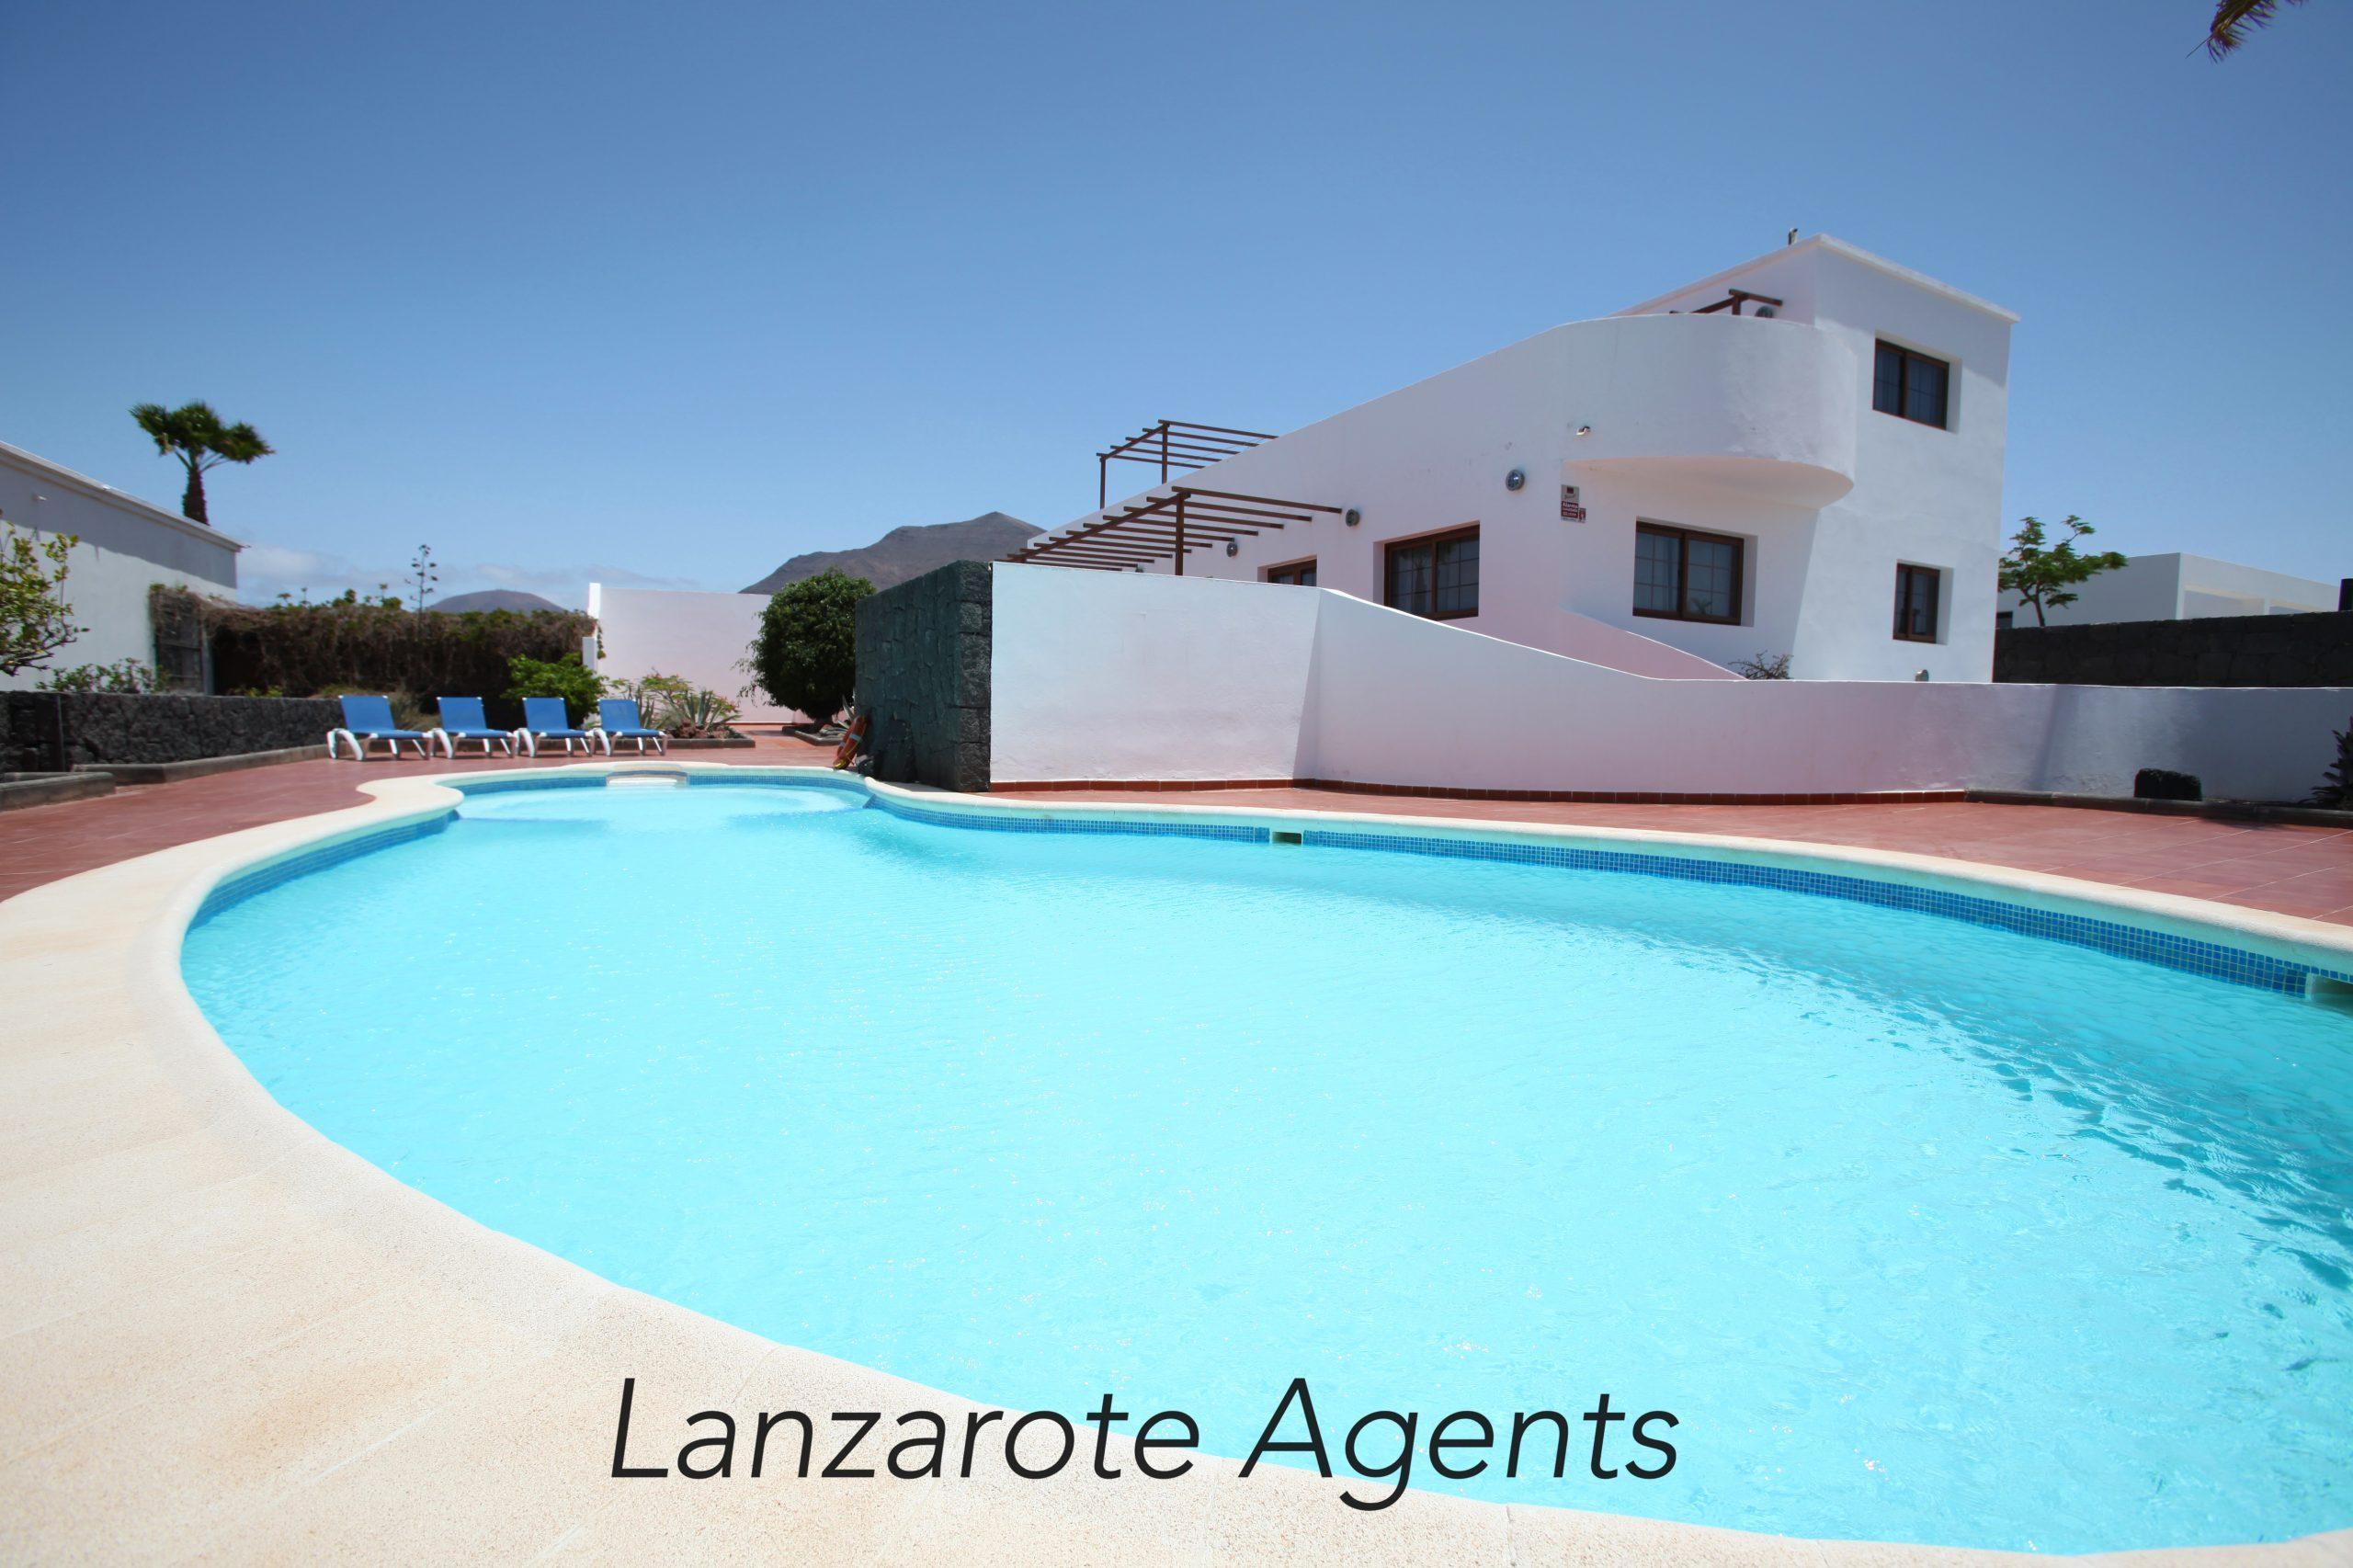 Perfectly Priced !! Detached Villa in Playa Blanca with Big Private Pool, Great Sea and Mountain  Views and Potential